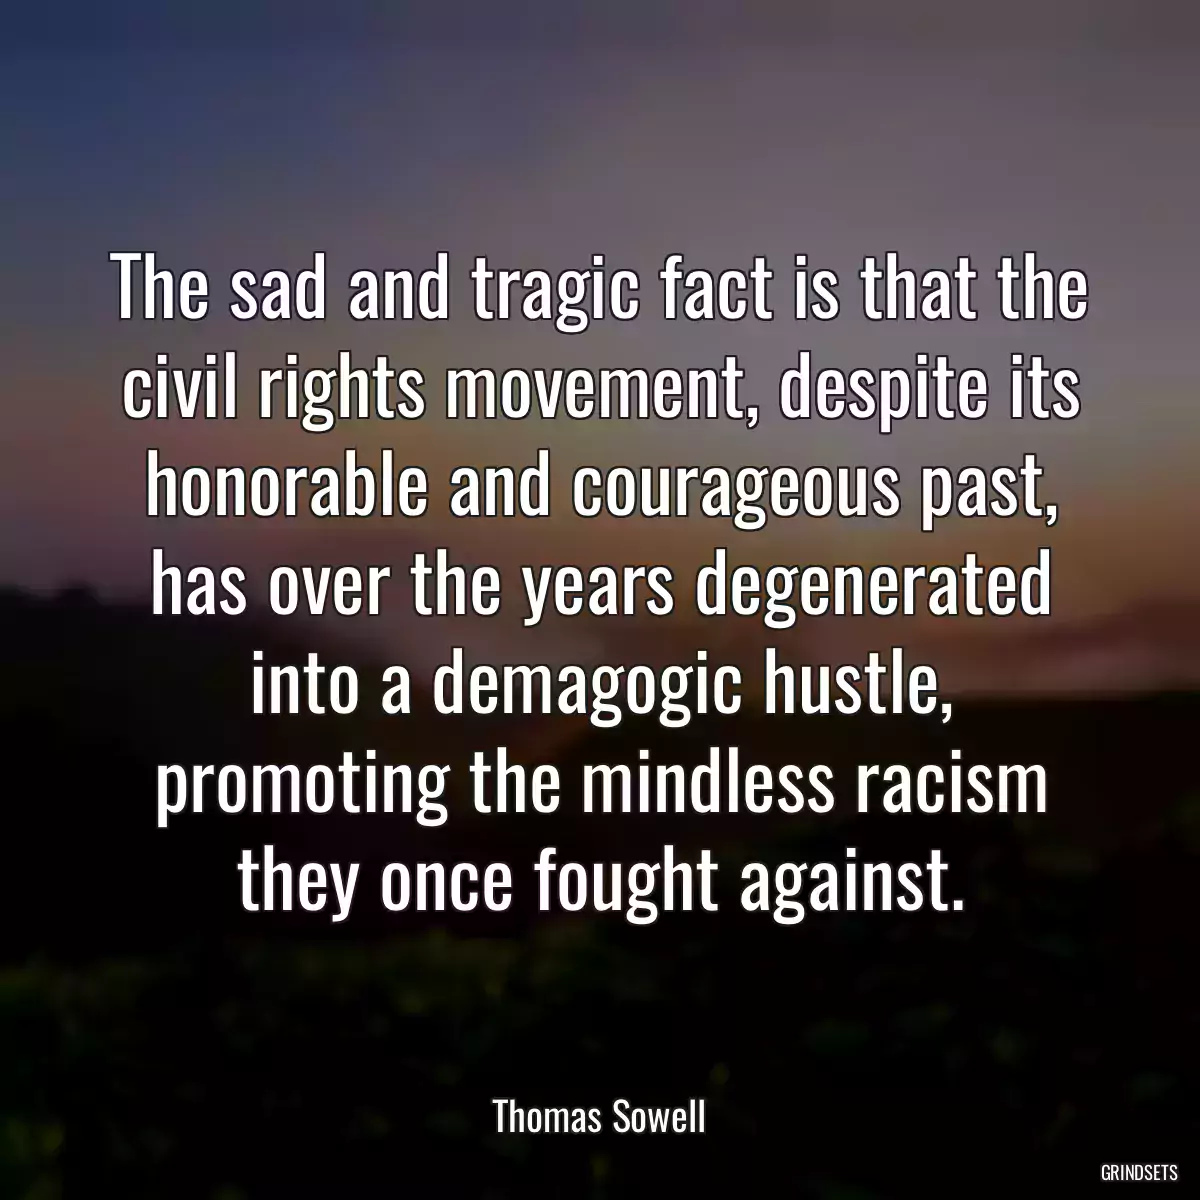 The sad and tragic fact is that the civil rights movement, despite its honorable and courageous past, has over the years degenerated into a demagogic hustle, promoting the mindless racism they once fought against.